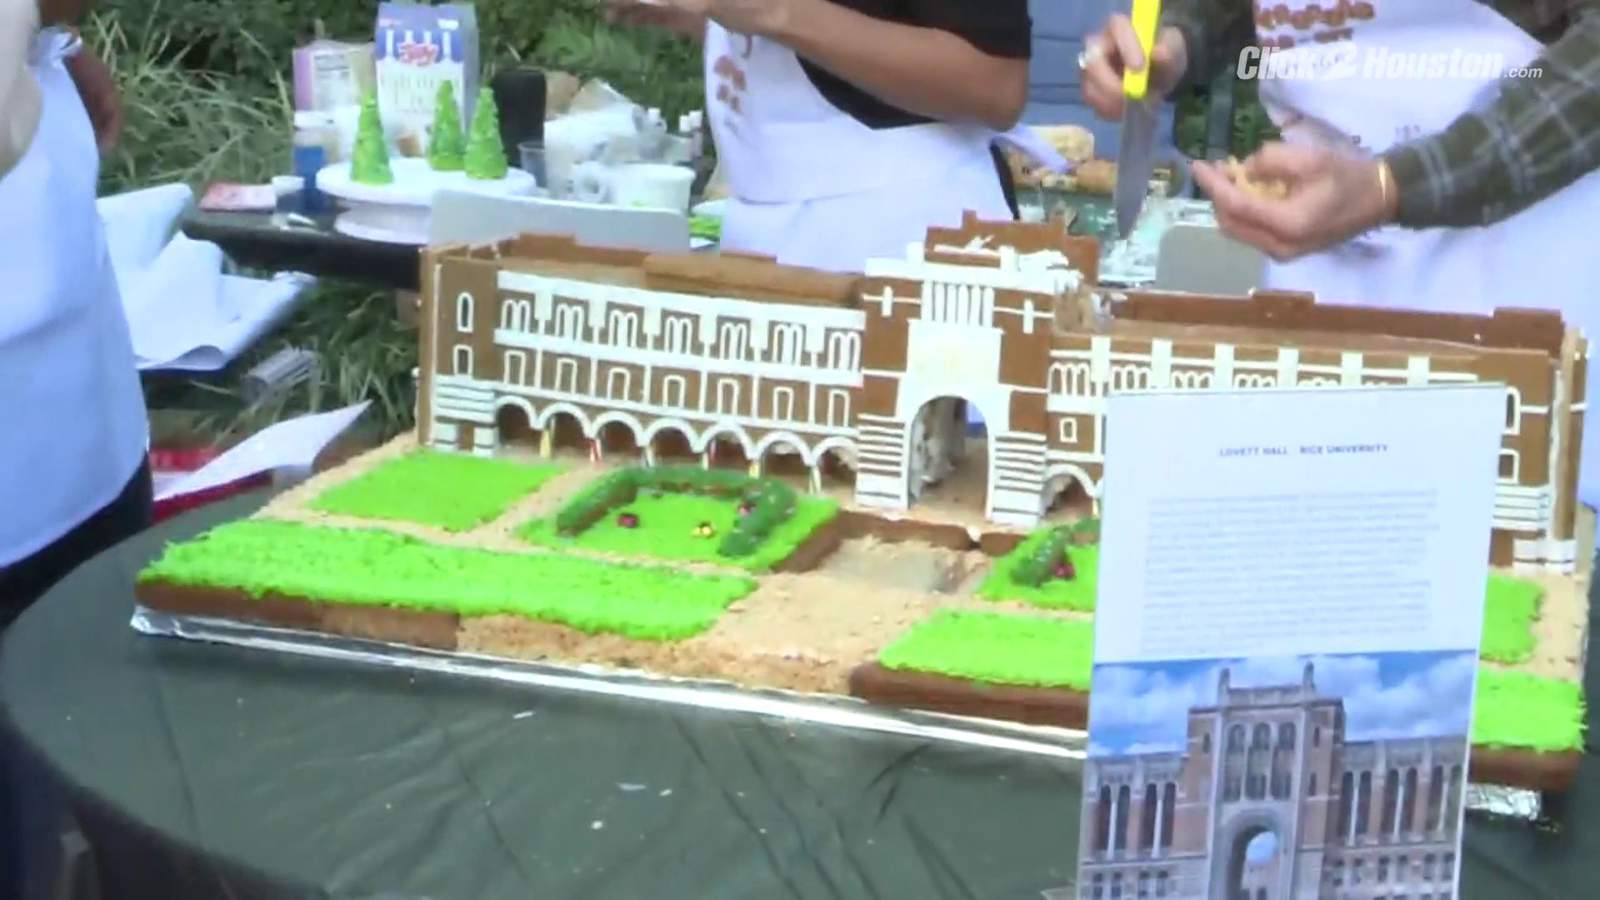 Gingerbread Build-Off competition draws thousands to watch epic holiday creation